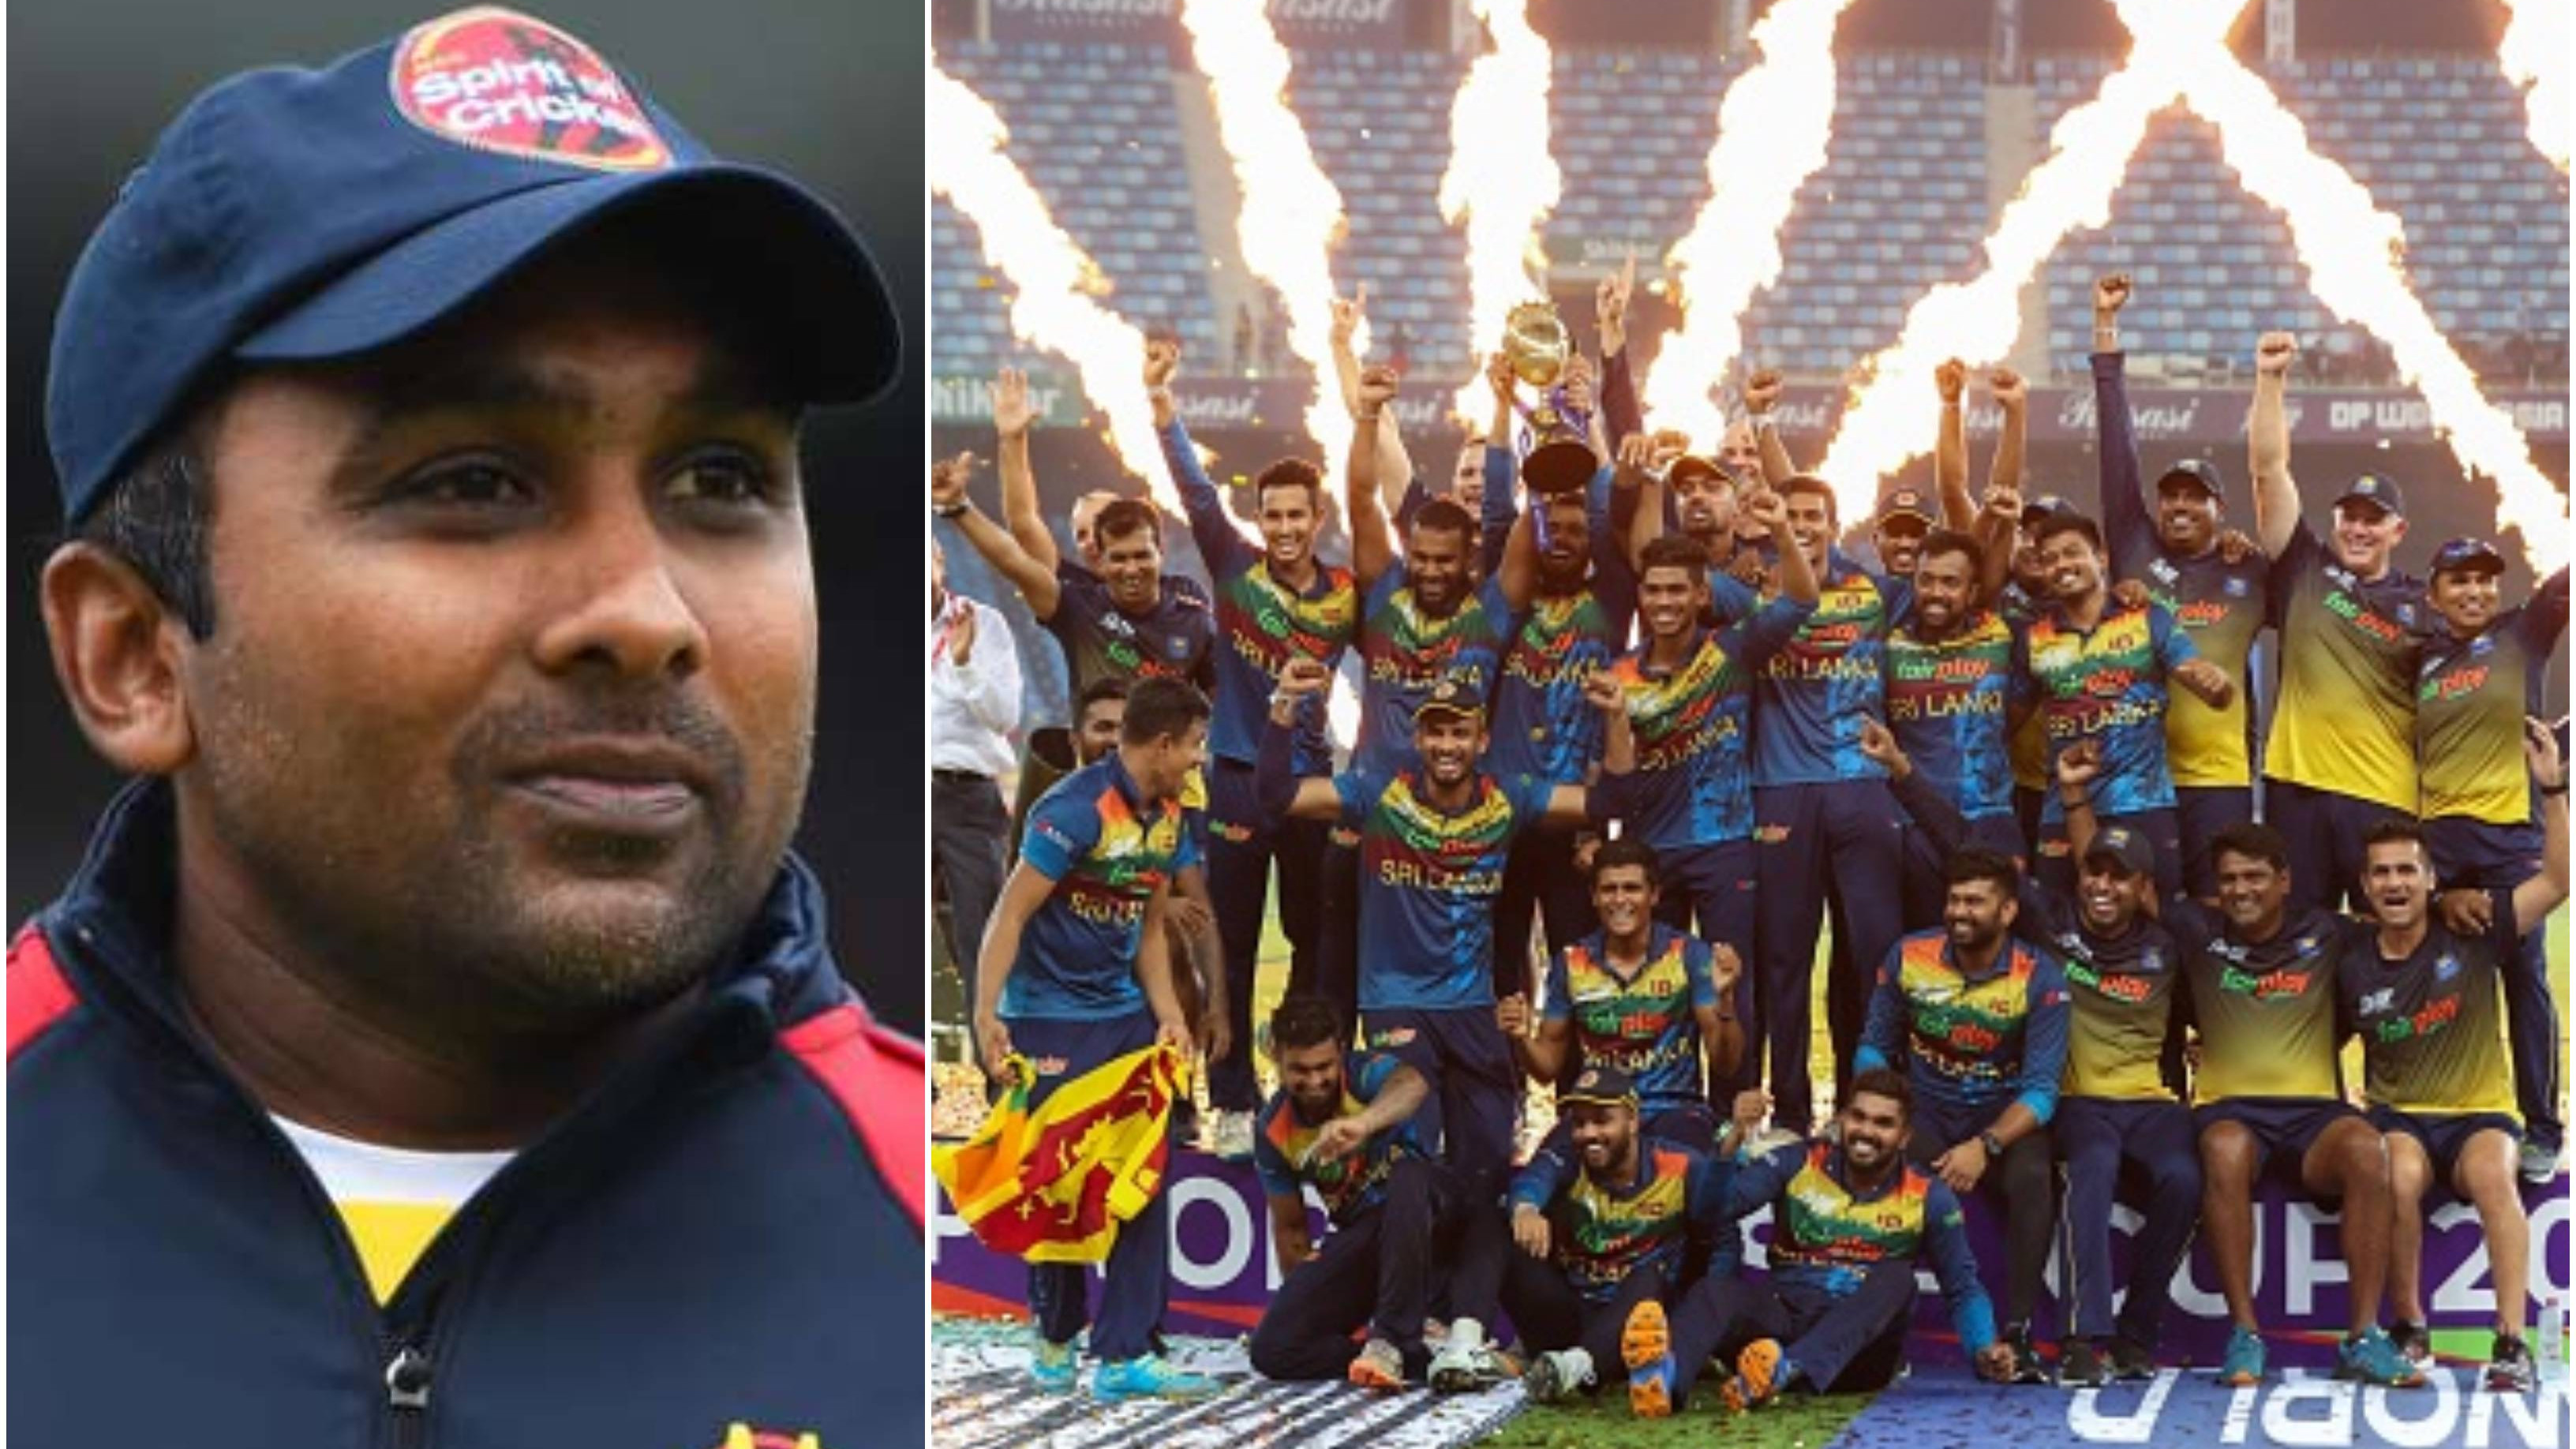 ‘Sri Lanka shouldn't be looking at any other thing than winning T20 World Cup’: Jayawardena after team’s Asia Cup triumph